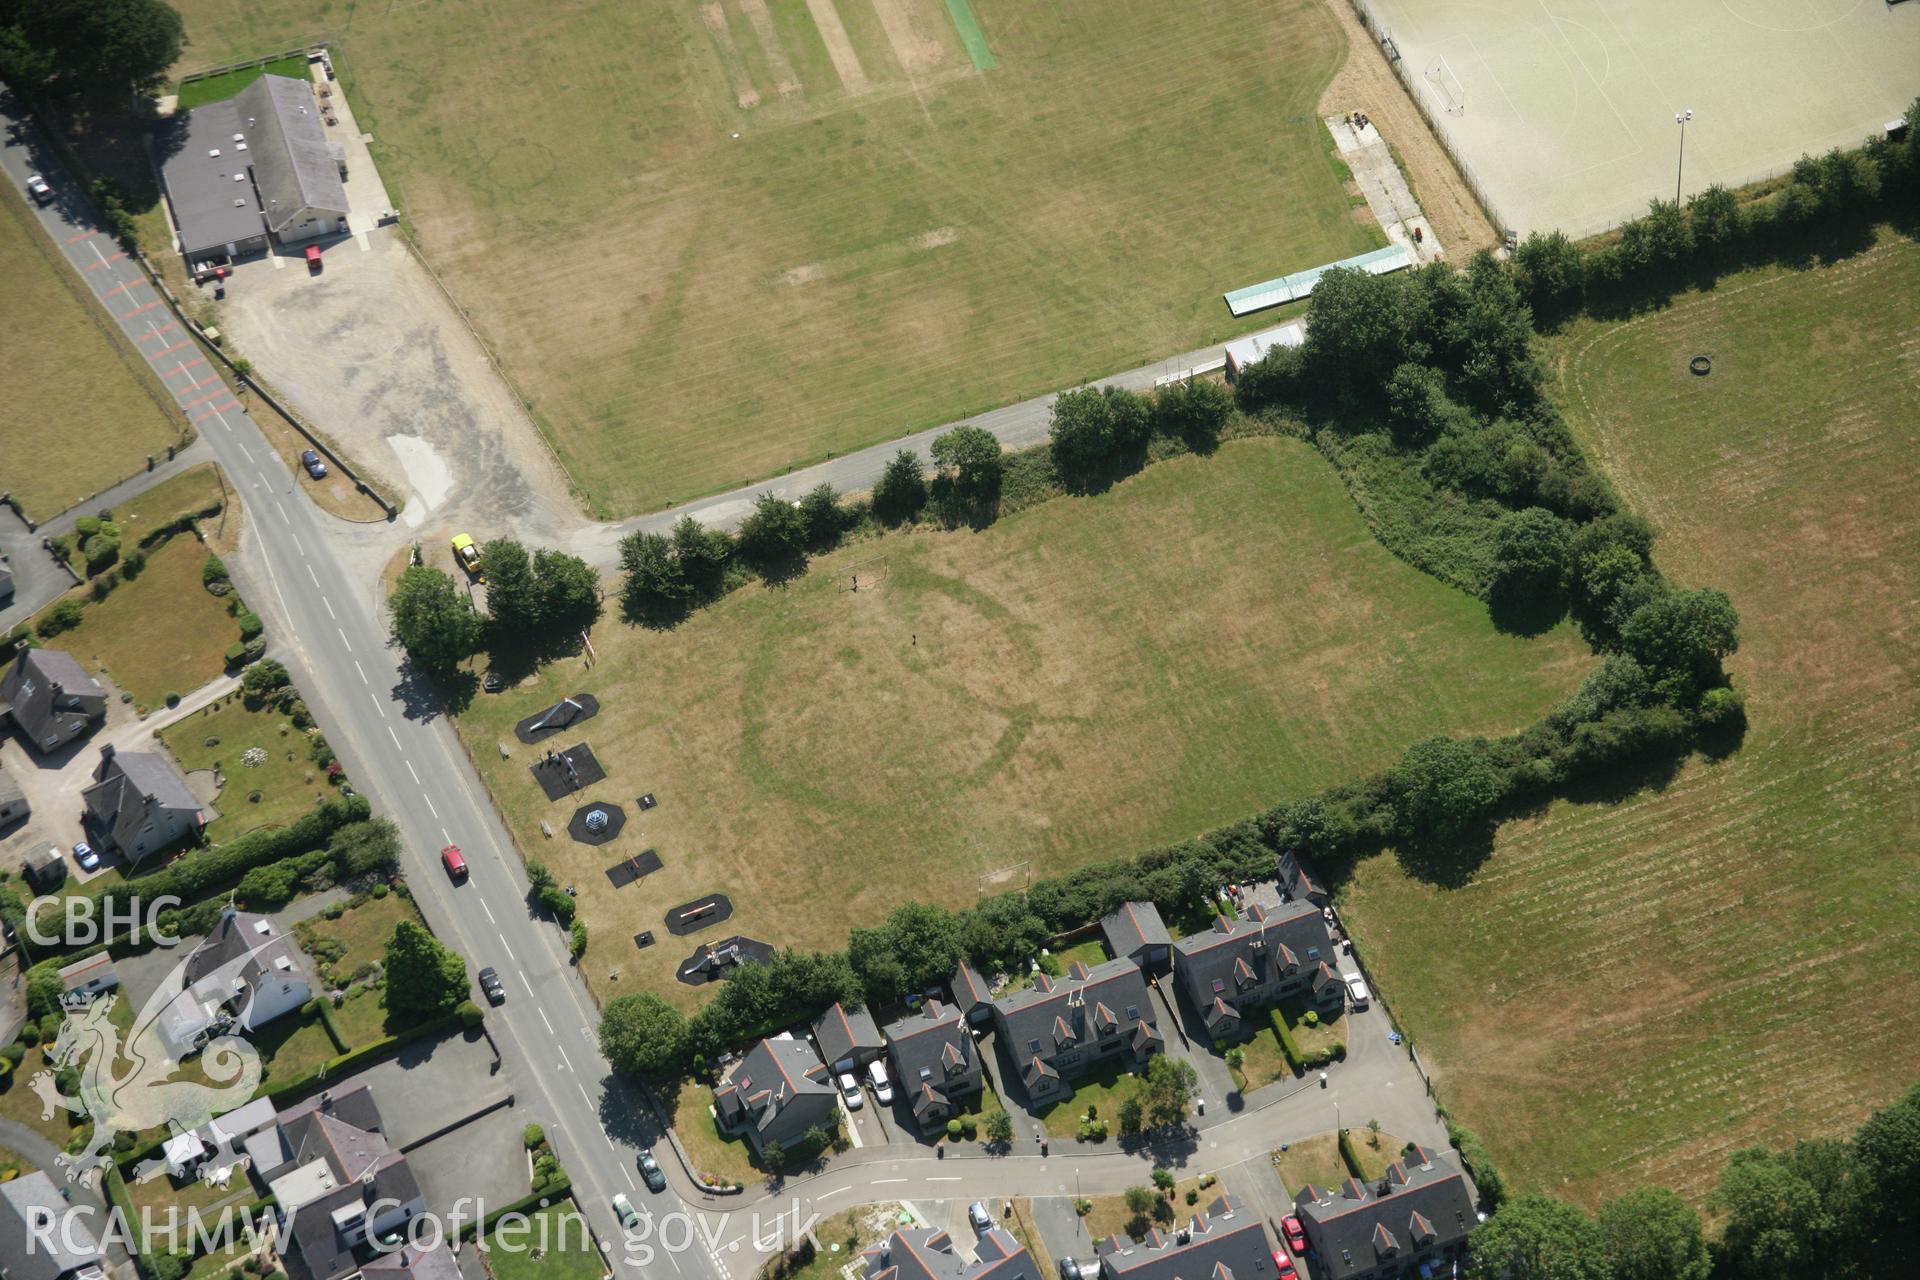 RCAHMW colour oblique aerial photograph of King George's Field Enclosure, viewed from the north. Taken on 03 August 2006 by Toby Driver